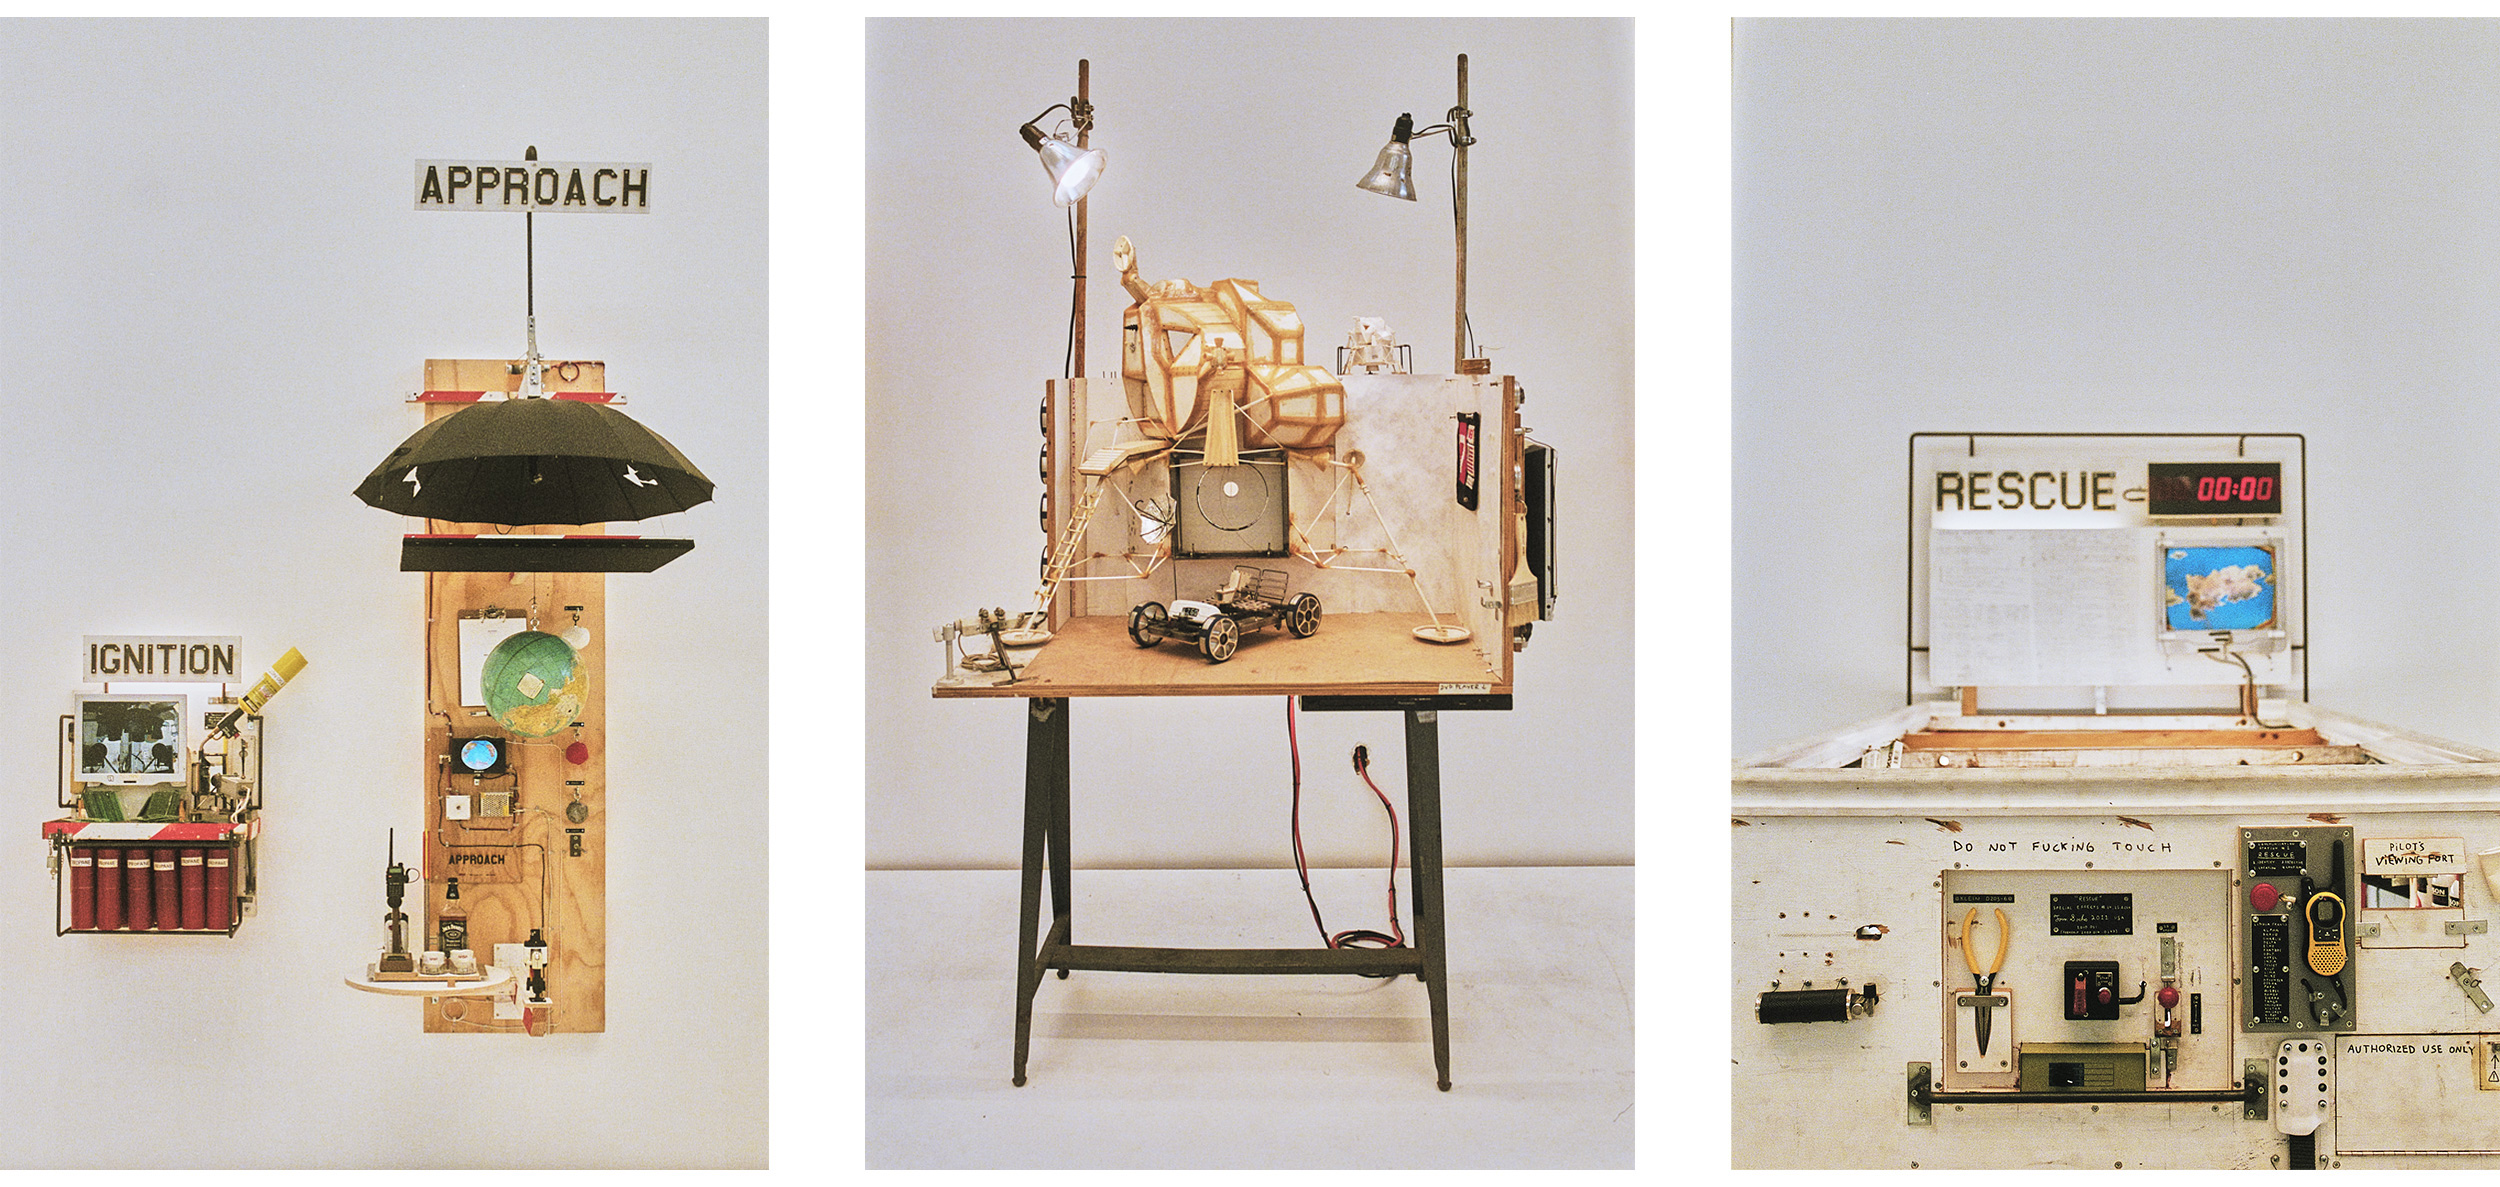 Tom Sachs on Switzerland, LSD, and the cult of organisation